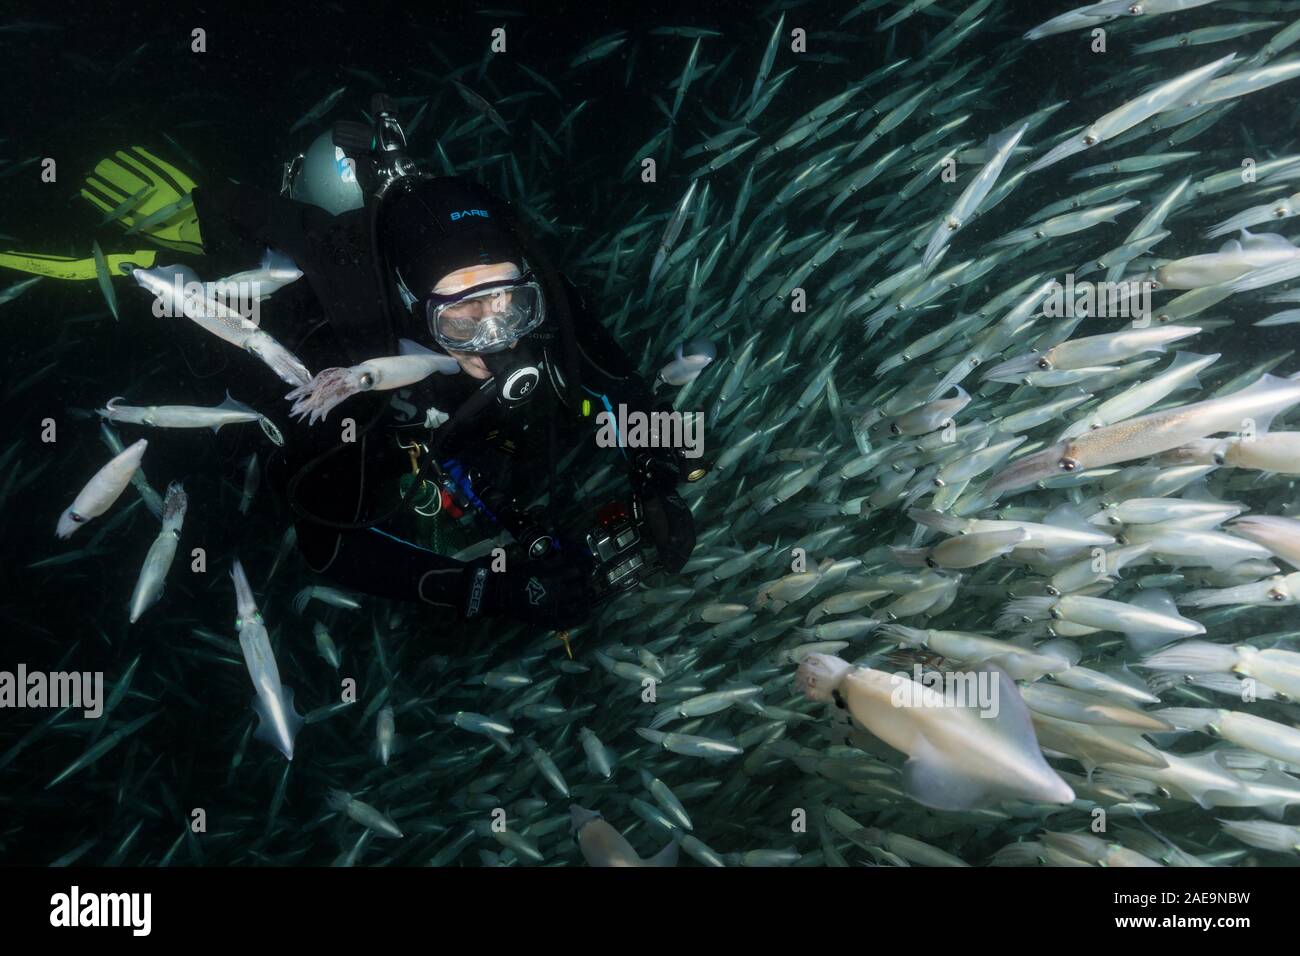 A scuba diver watches a wall of market squid (Doryteuthis opalescens) during a mating aggregation off Redondo Beach, California. Stock Photo